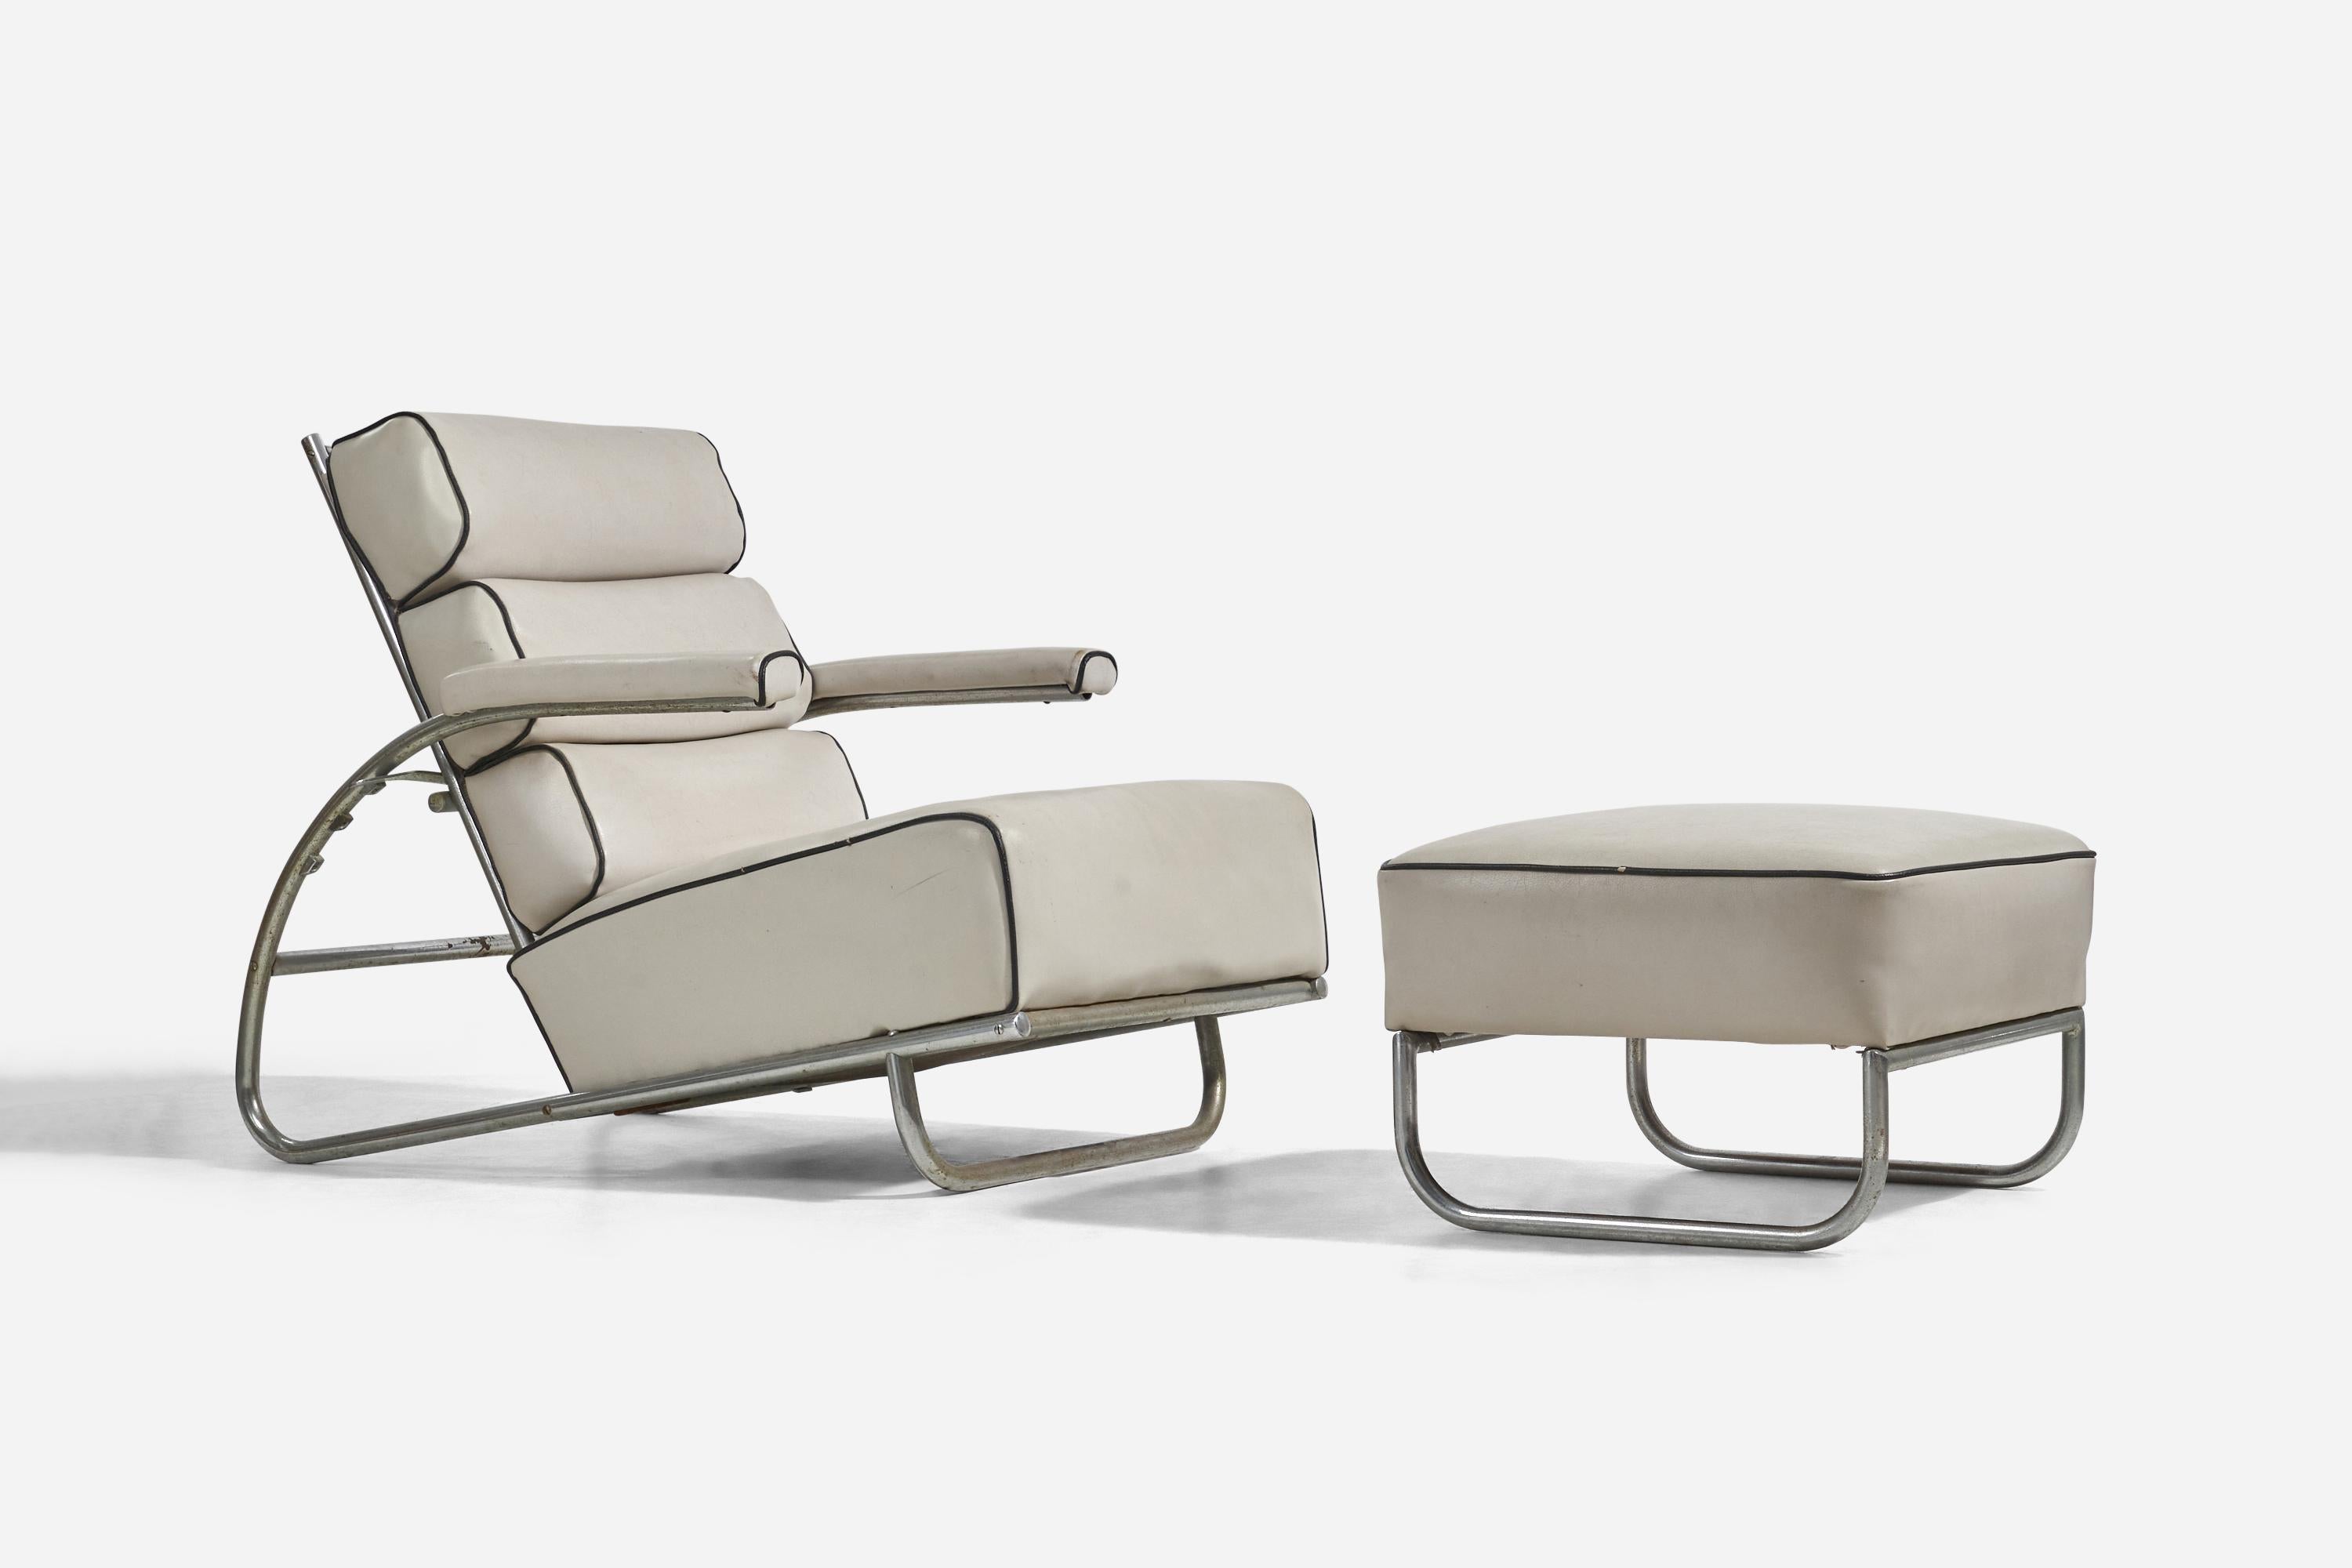 An adjustable, chrome steel and white vinyl lounge chair with ottoman, designed by Gilbert Rohde and produced by Troy Sunshade Company, Troy, Ohio, 1940s.
